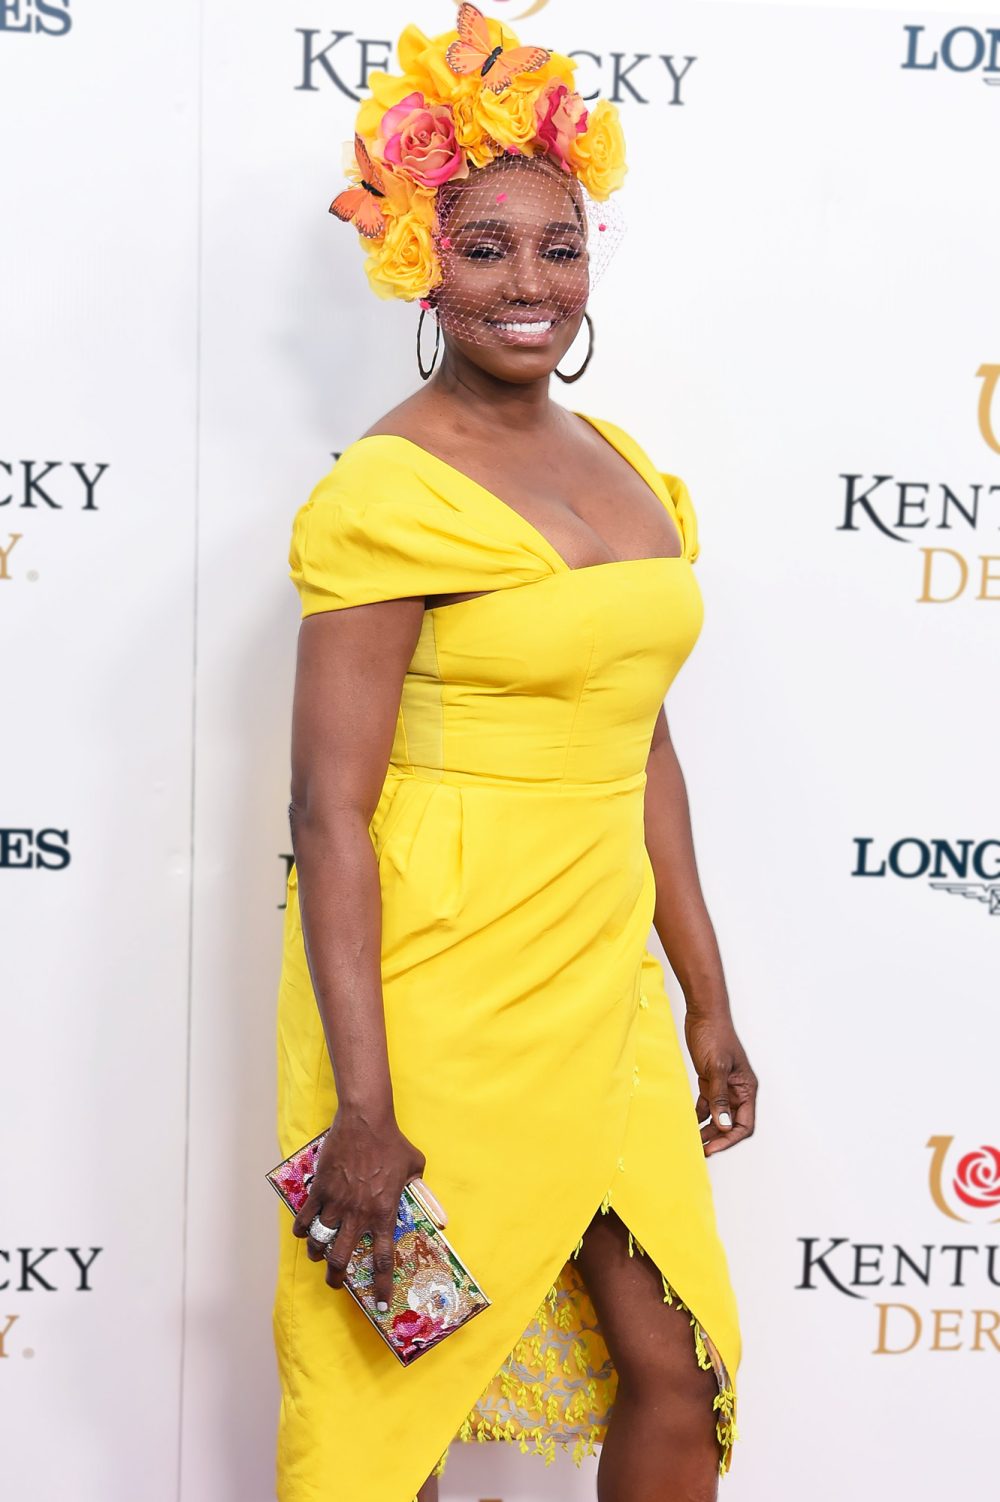 NeNe Leakes Lost 12 Pounds Thanks to These Diet Tweaks